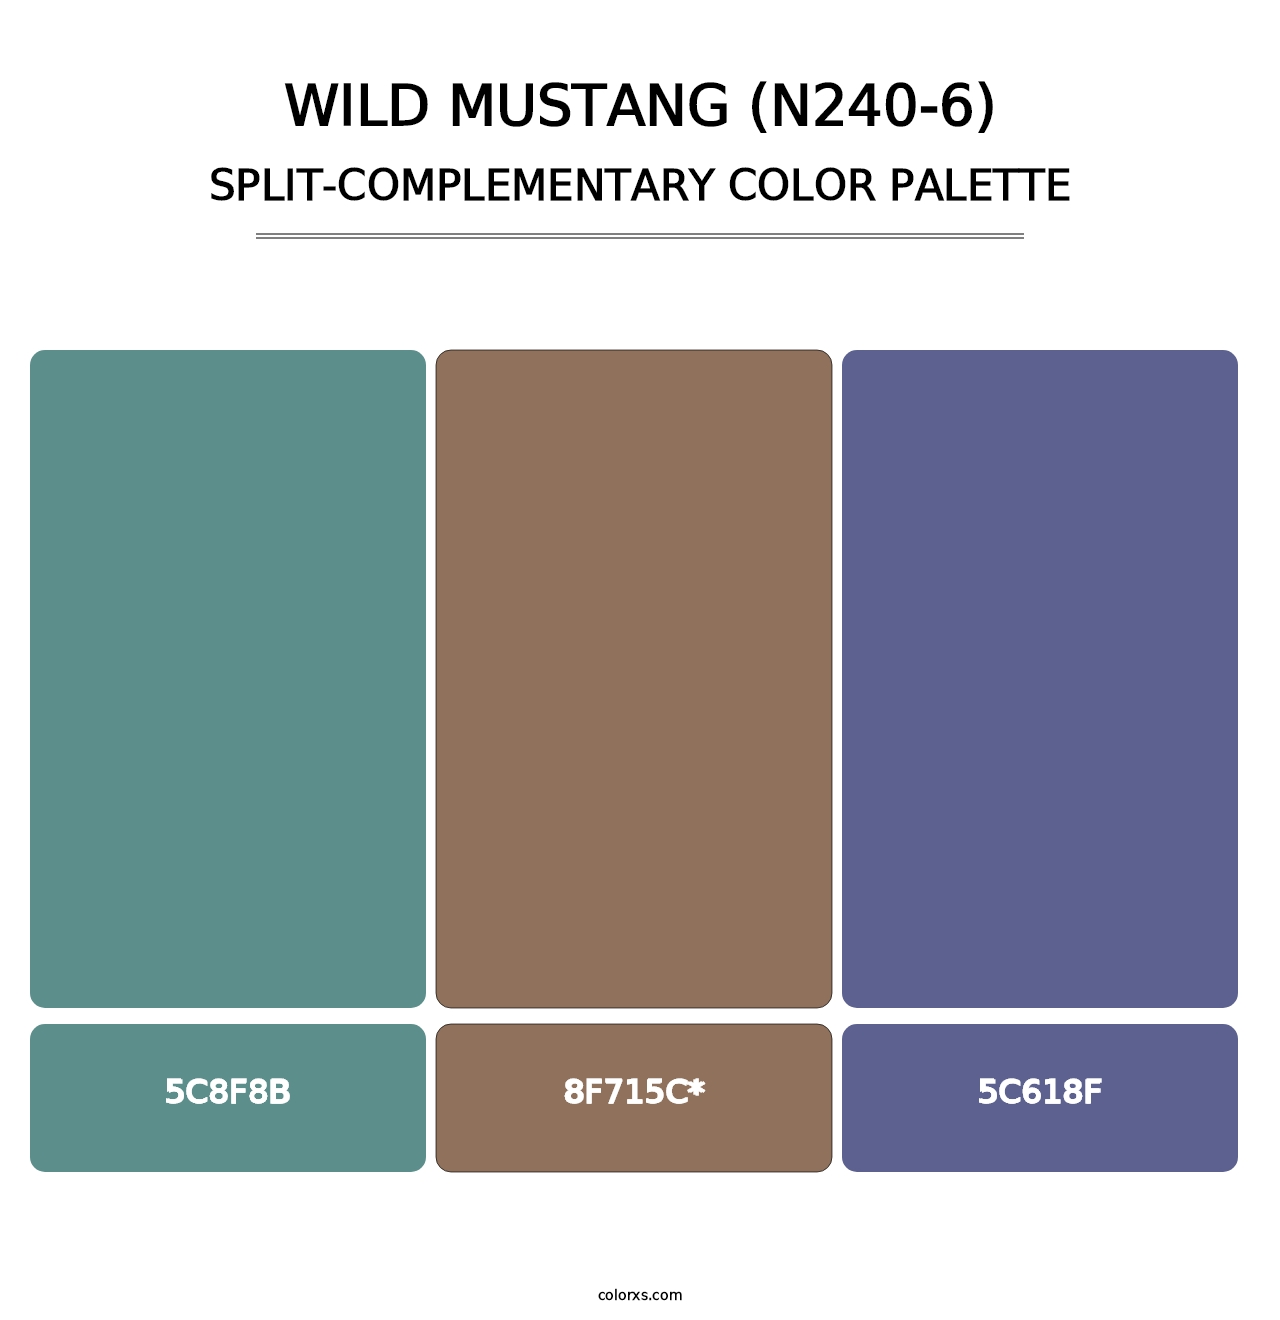 Wild Mustang (N240-6) - Split-Complementary Color Palette